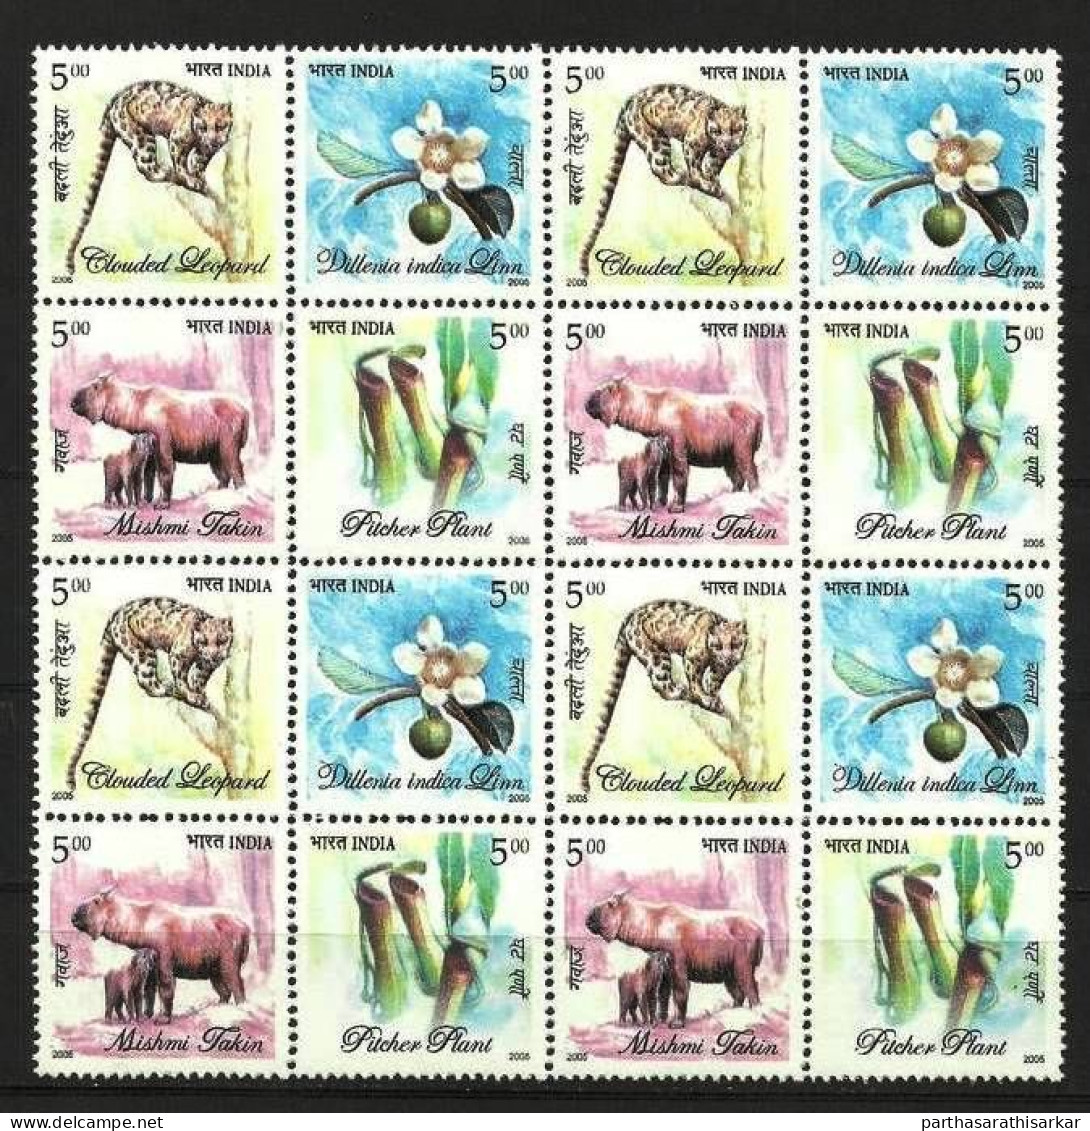 INDIA 2005 FLORA AND FAUNA OF NORTH EAST INDIA COMPLETE SE-TANENT BLOCK OF 4 MNH RARE - Ongebruikt